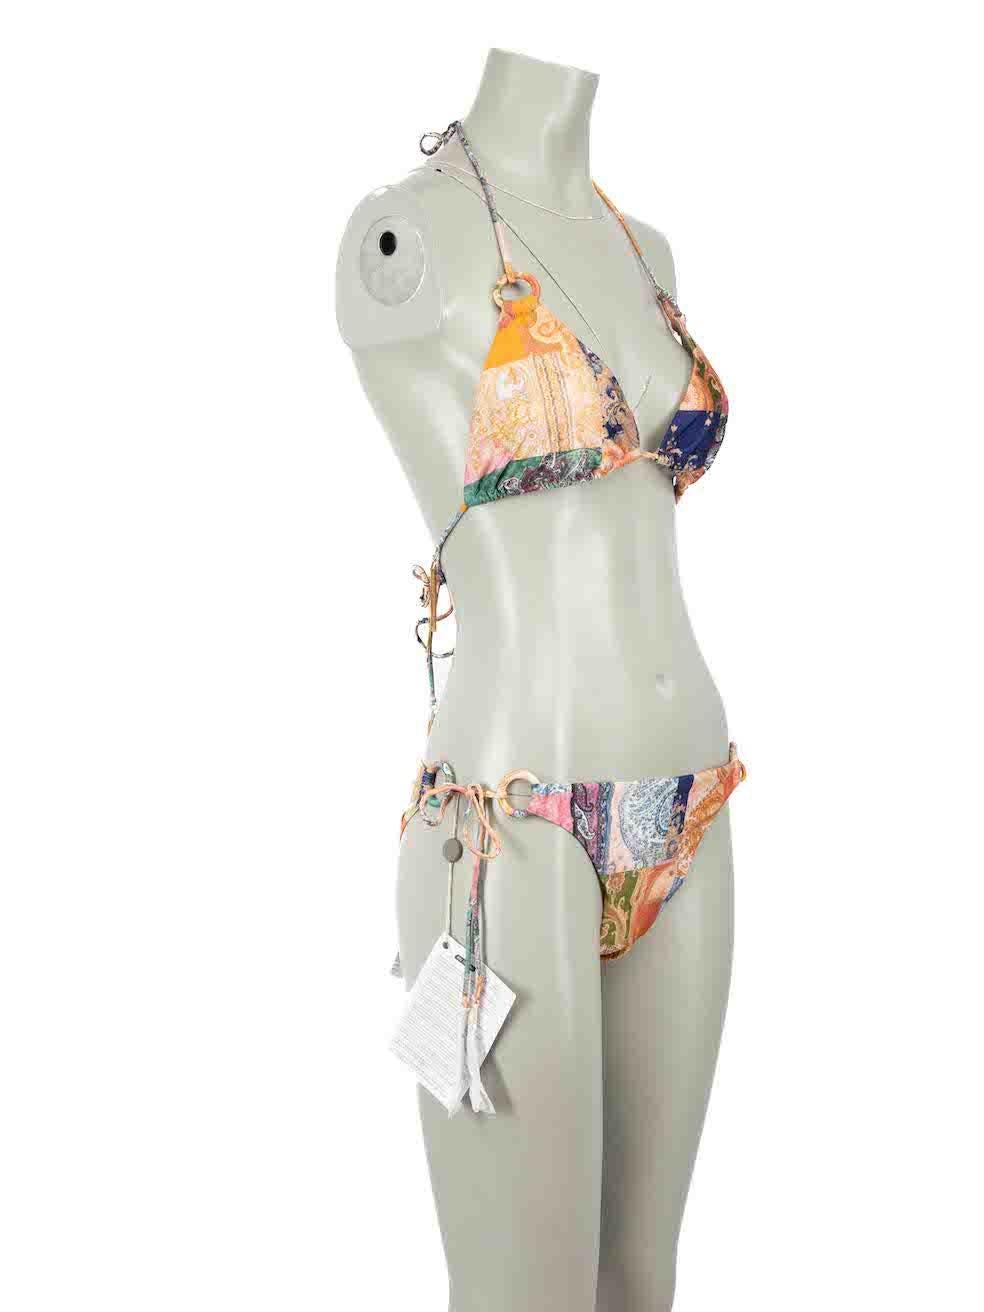 CONDITION is Never worn, with tags. No visible wear to bikini is evident on this new Zimmermann designer resale item.
 
 Details
 Anneke
 Multicolour
 Synthetic
 Bikini set
 Ethnic pattern
 Stretchy
 Hooped chain with tie strap closure
 Padded cups
